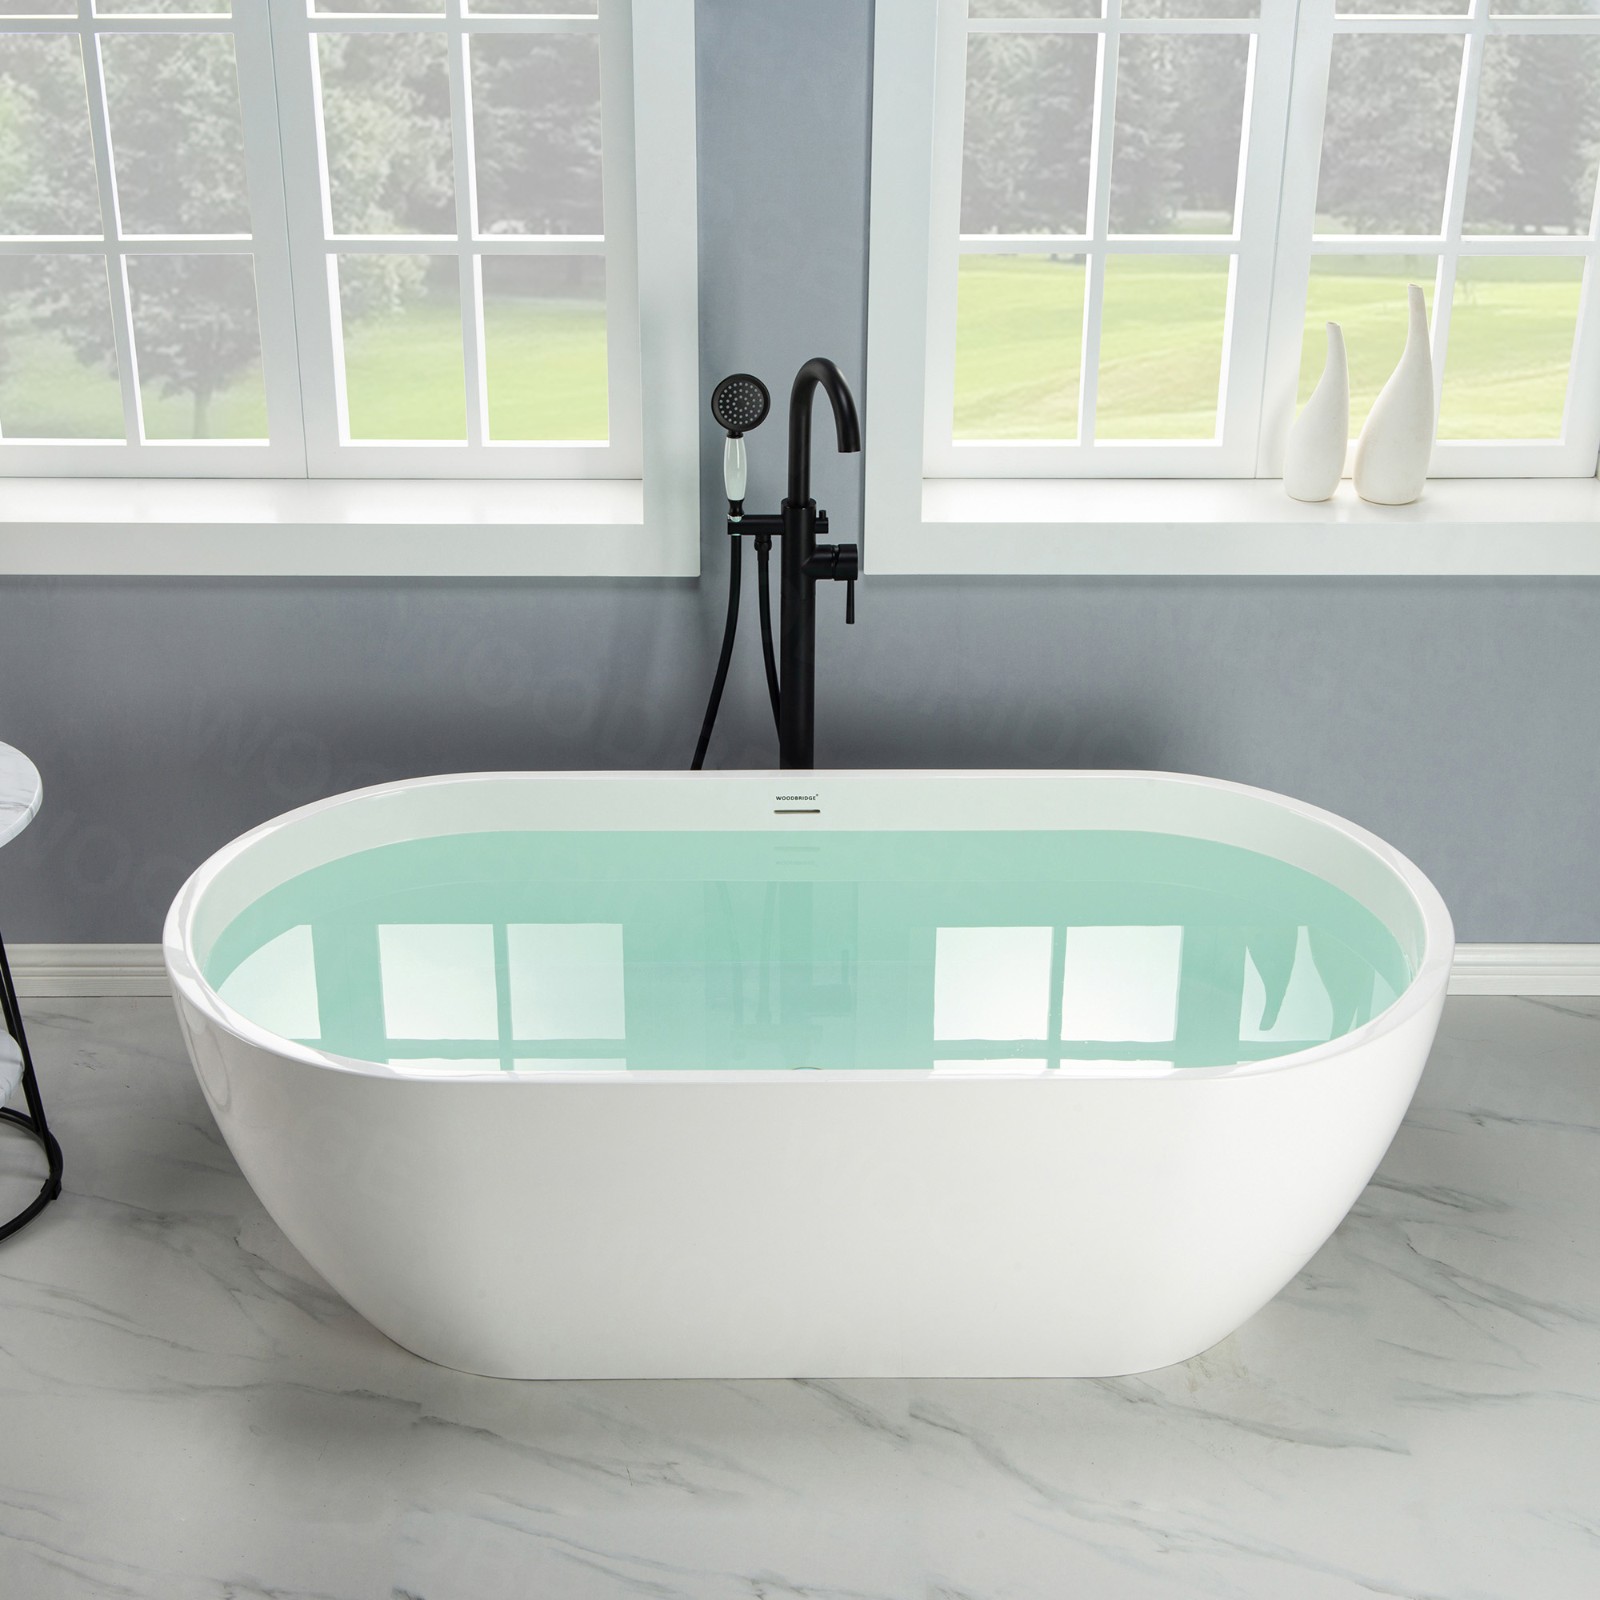  WOODBRIDGE 63 in. Freestanding Double Ended Solid Surface Soaking Bathtub with Center Drain Assembly and Overflow, B--51/BTA0051, Glossy White_8413